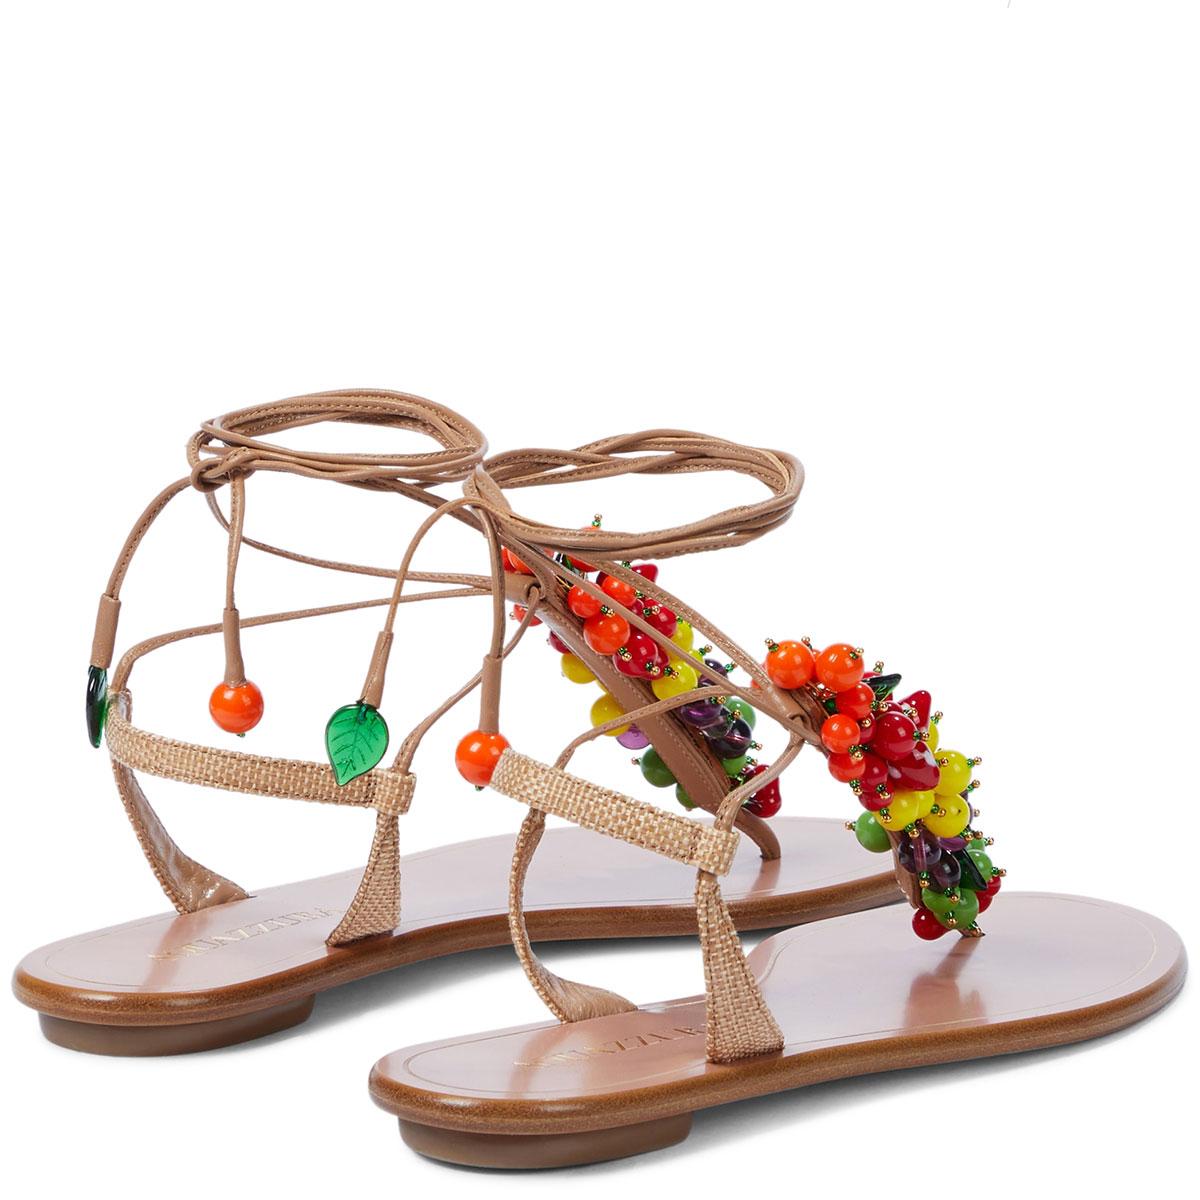 100% authentic Aquazzura Tutti Frutti thong sandals are trimmed in a tempting variety of tropical fruits in colorful Murano glass. Made from beige lamb leather and trimmed with raffia on the heel featuring wrap-tie fastenings at the ankles. Brand